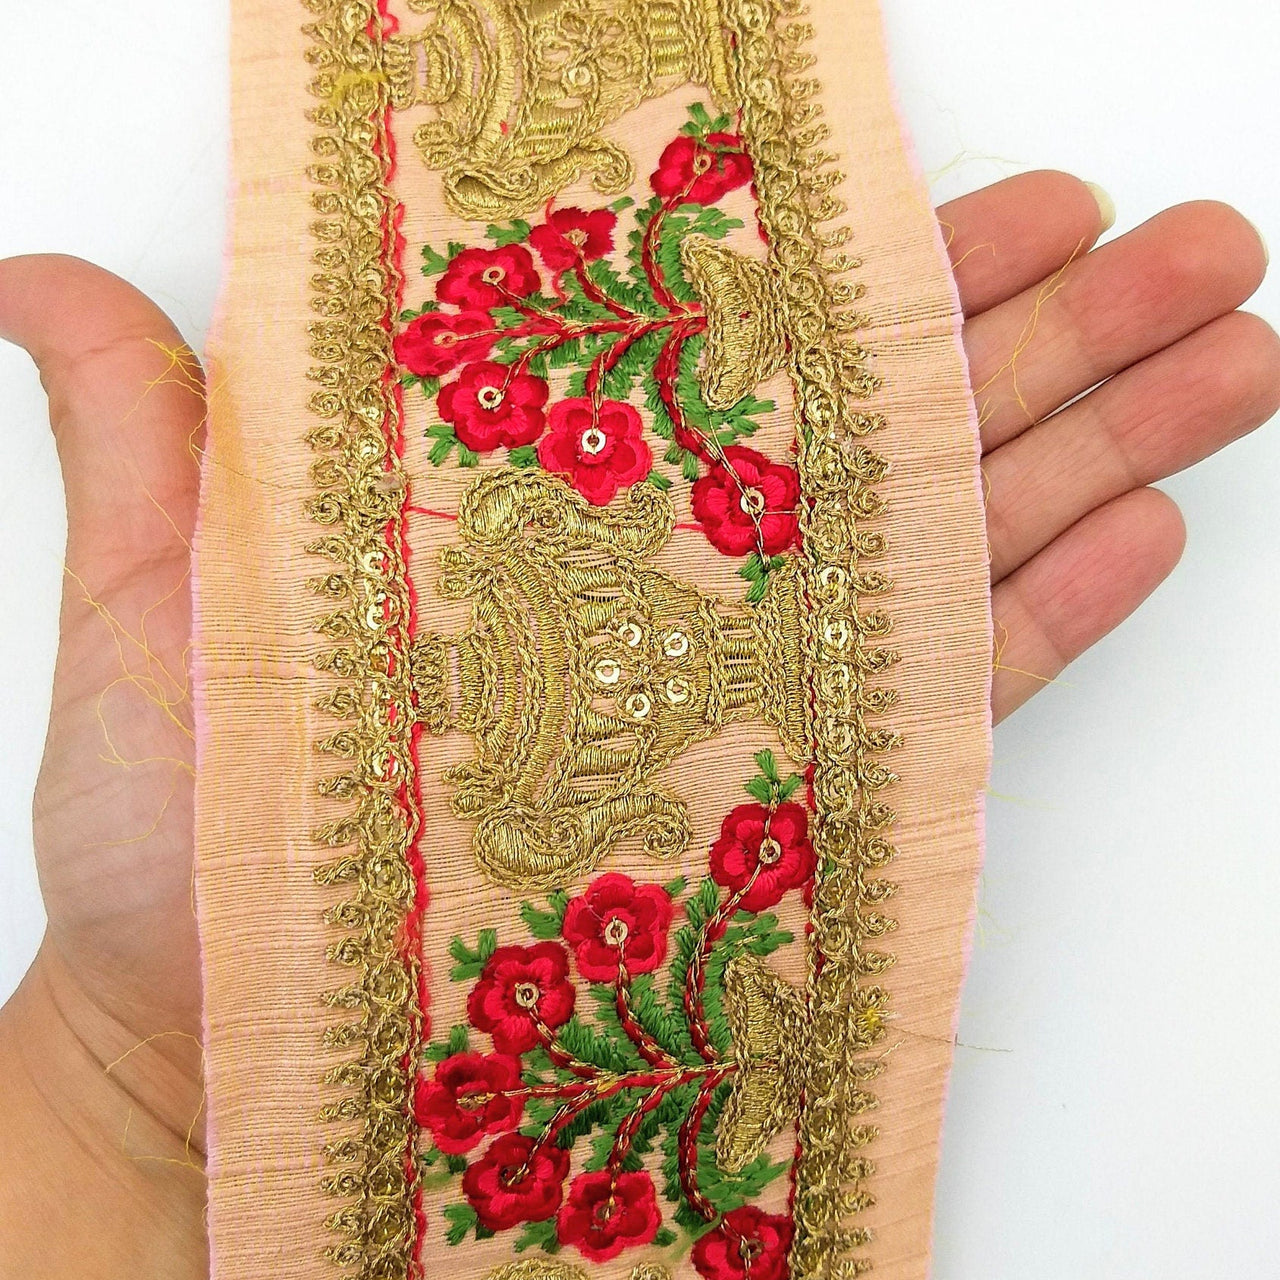 Peach Silk Trim With Floral Embroidery in Red, Green & Antique Gold, Indian Sari Border Trim By Yard Decorative Trim Craft Lace